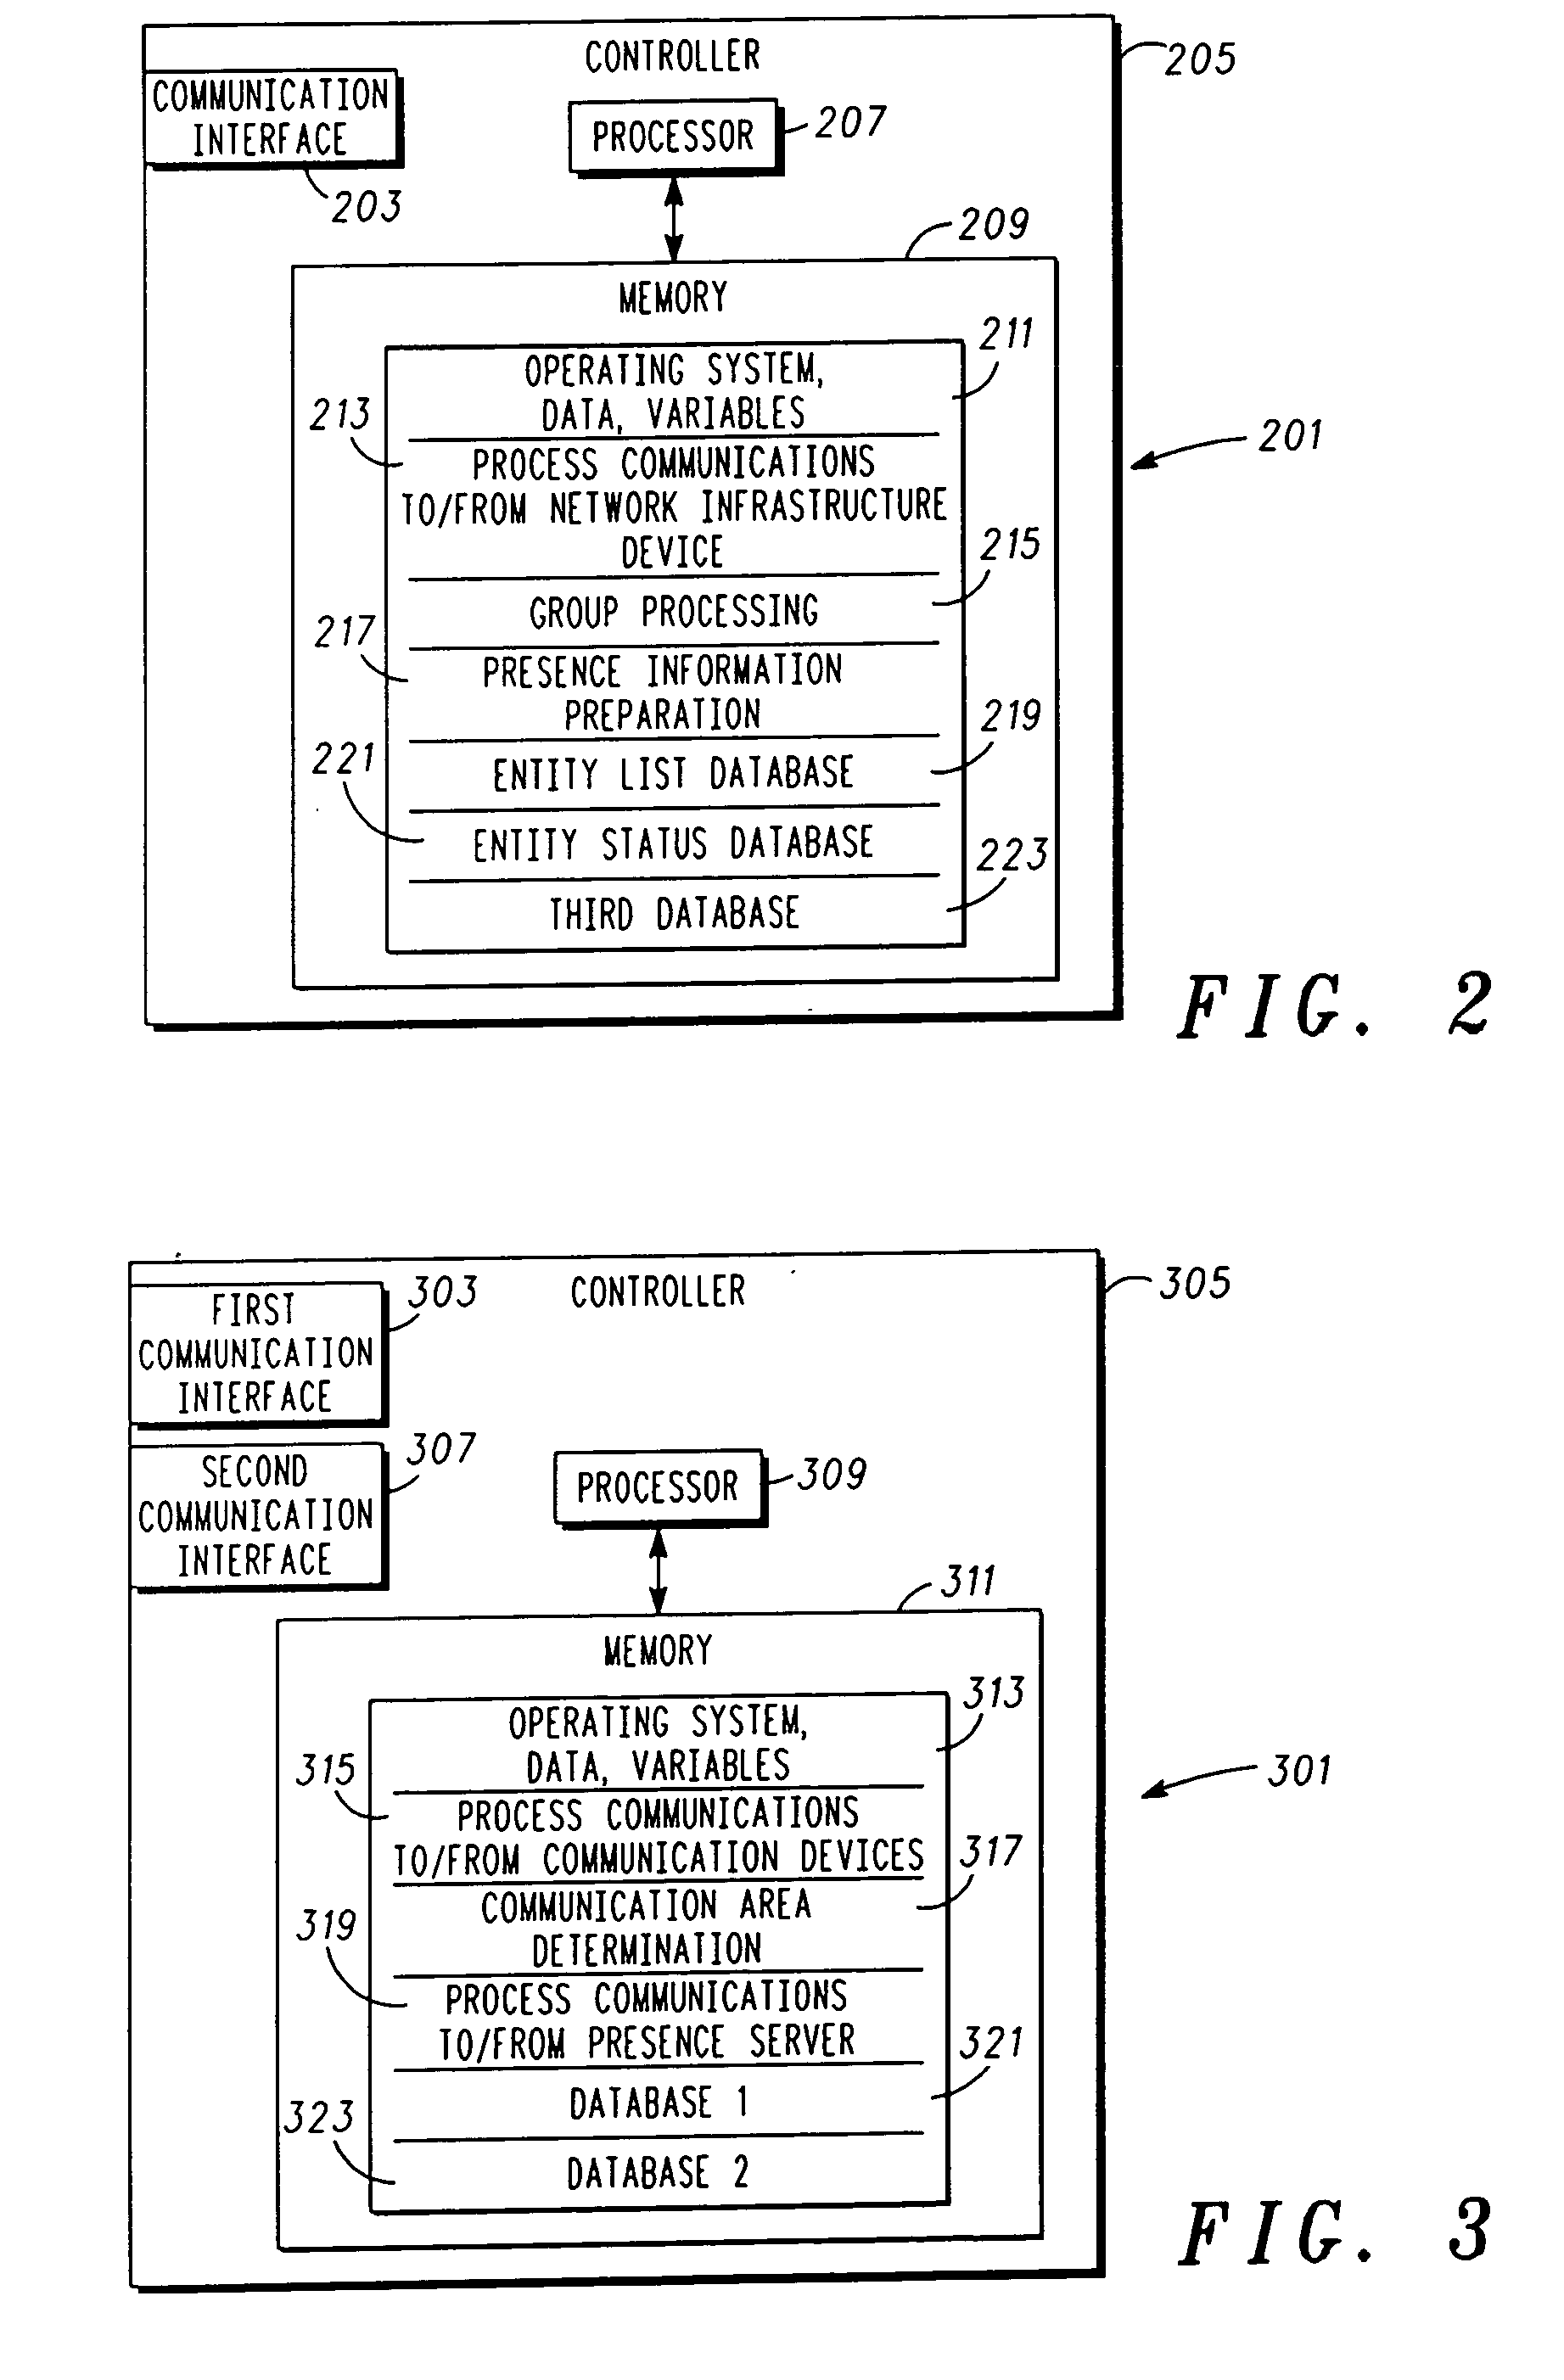 Providing presence information in a communication network